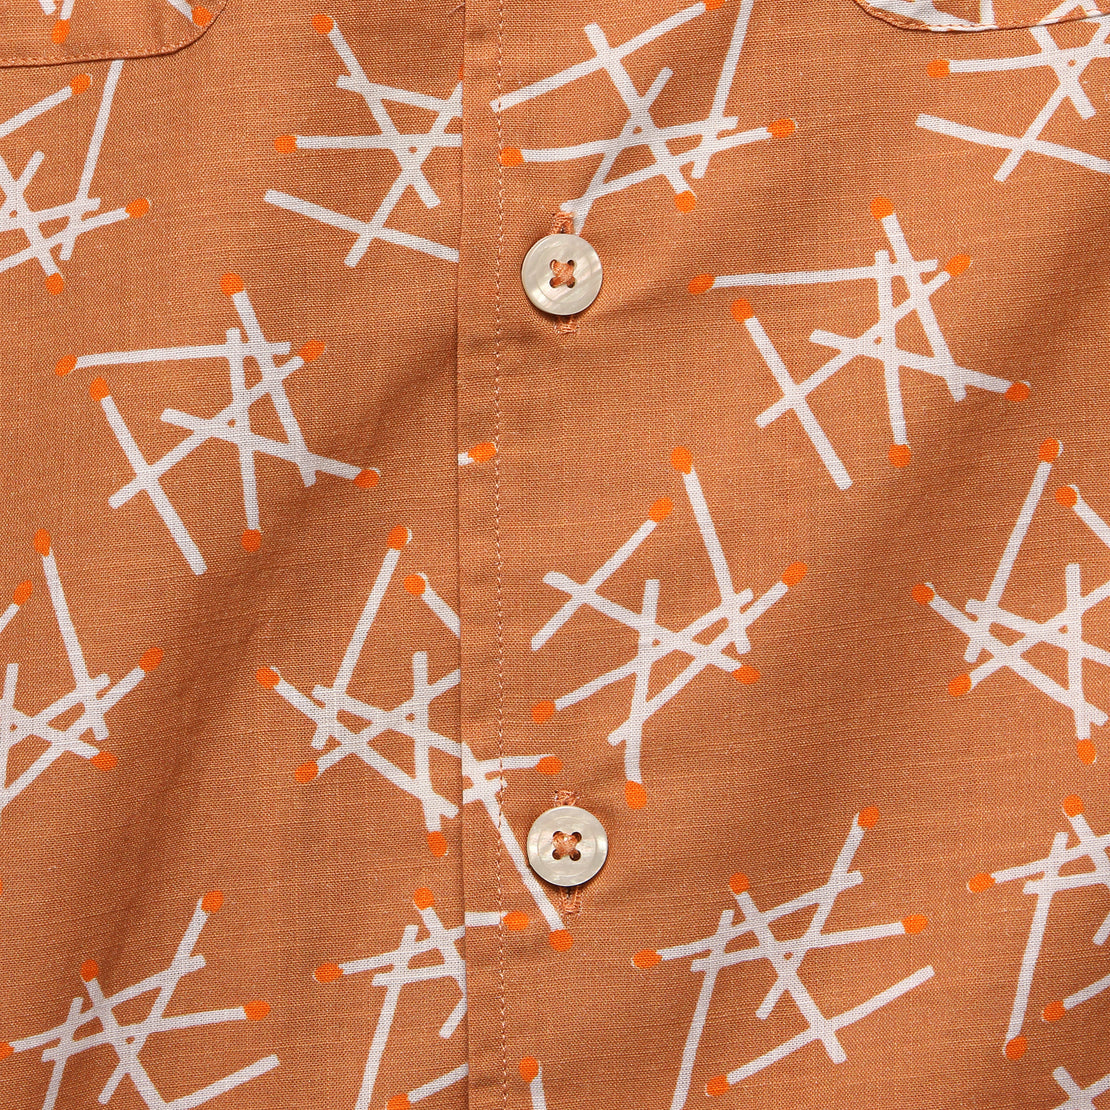 Matchstick Camp Shirt - Peach - Todd Snyder - STAG Provisions - Tops - S/S Woven - Other Pattern